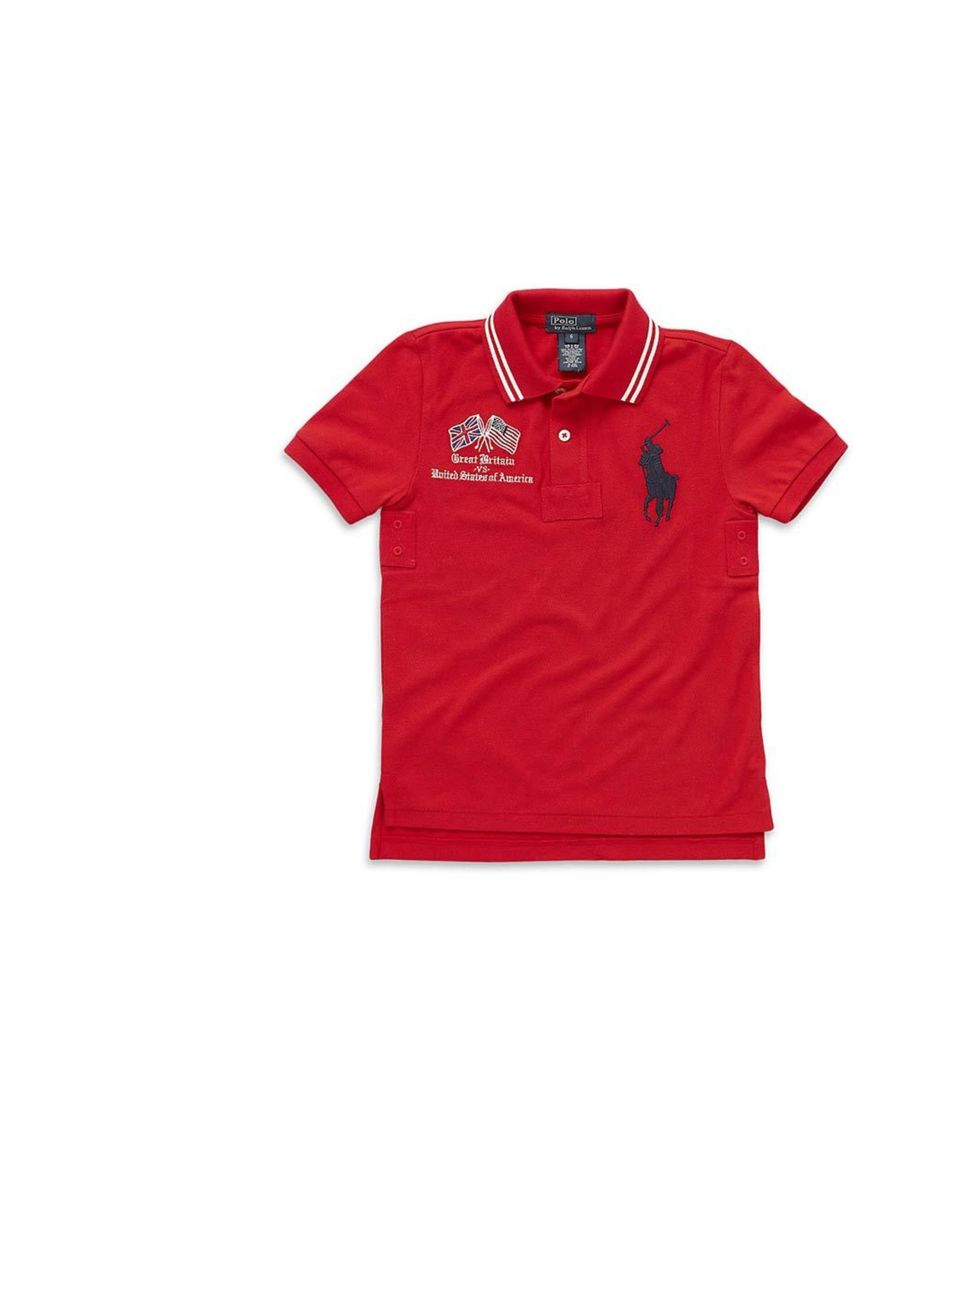 <p>Ralph Lauren 'Summer Sport Big Pony' polo shirt  £90, at <a href="http://www.harrods.com/product/olympic-big-pony-polo-shirt/ralph-lauren/000000000002773854">Harrods.com</a></p>